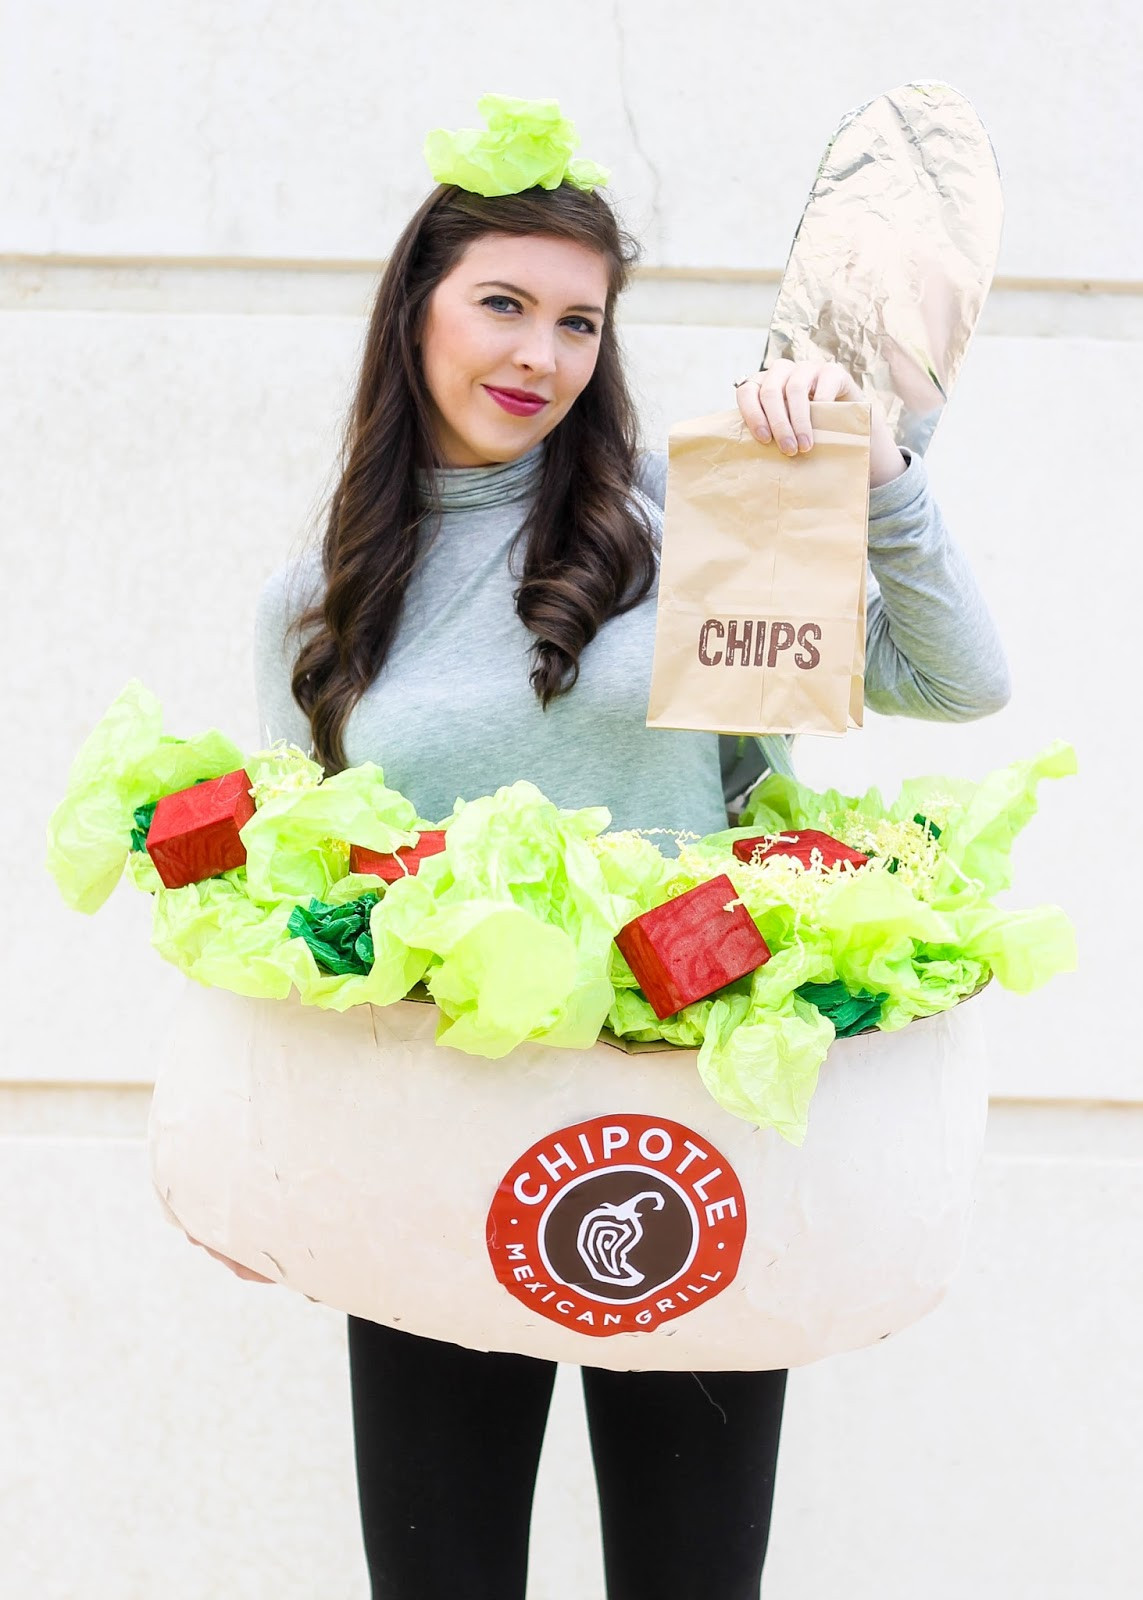 DIY Halloween Costumes
 Halloween Chipotle Costume DIY Pretty in the Pines